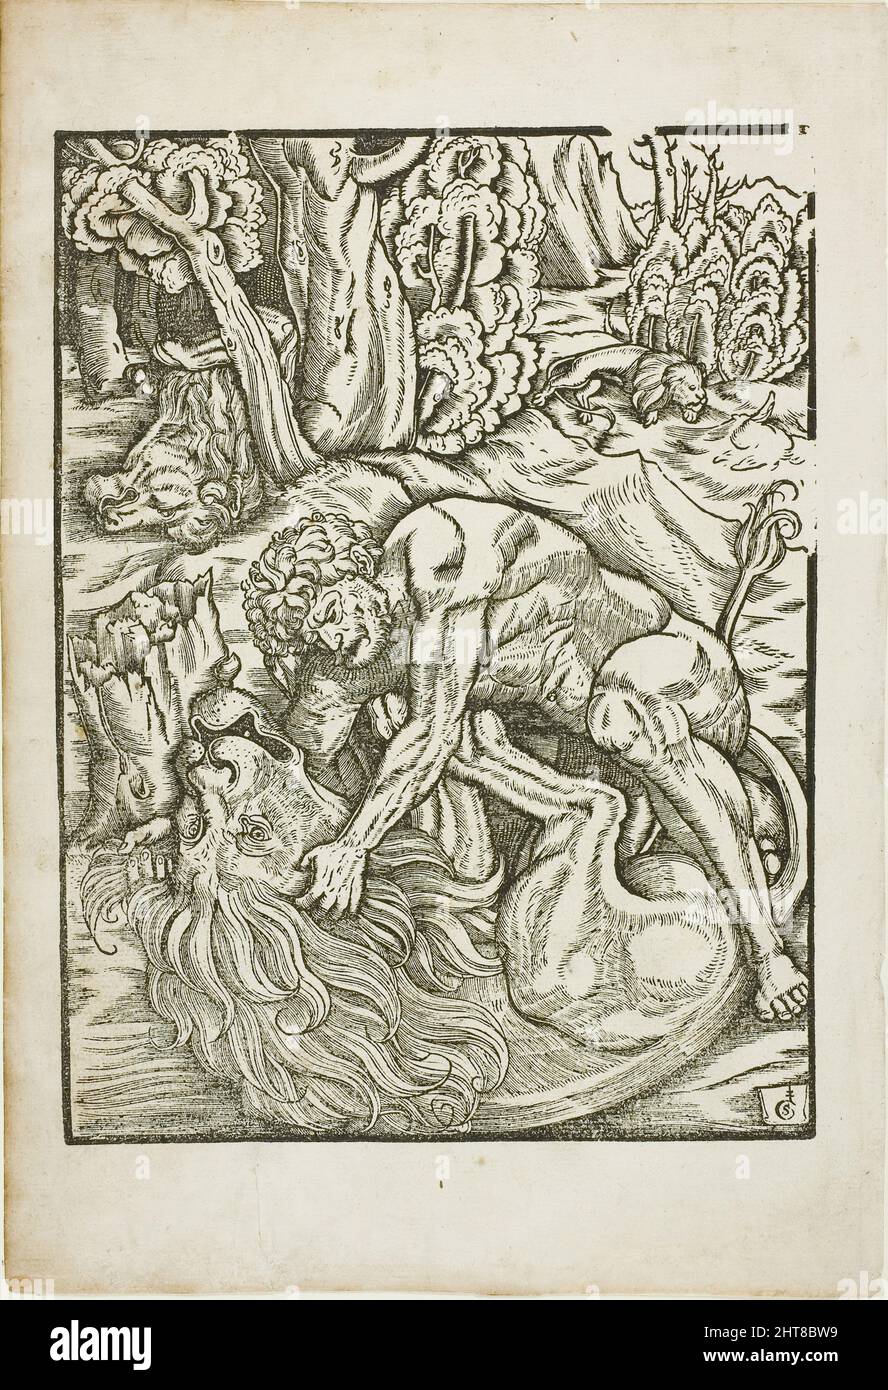 Hercules Strangling the Nemean Lion, from the Labors of Hercules, c. 1528. Stock Photo